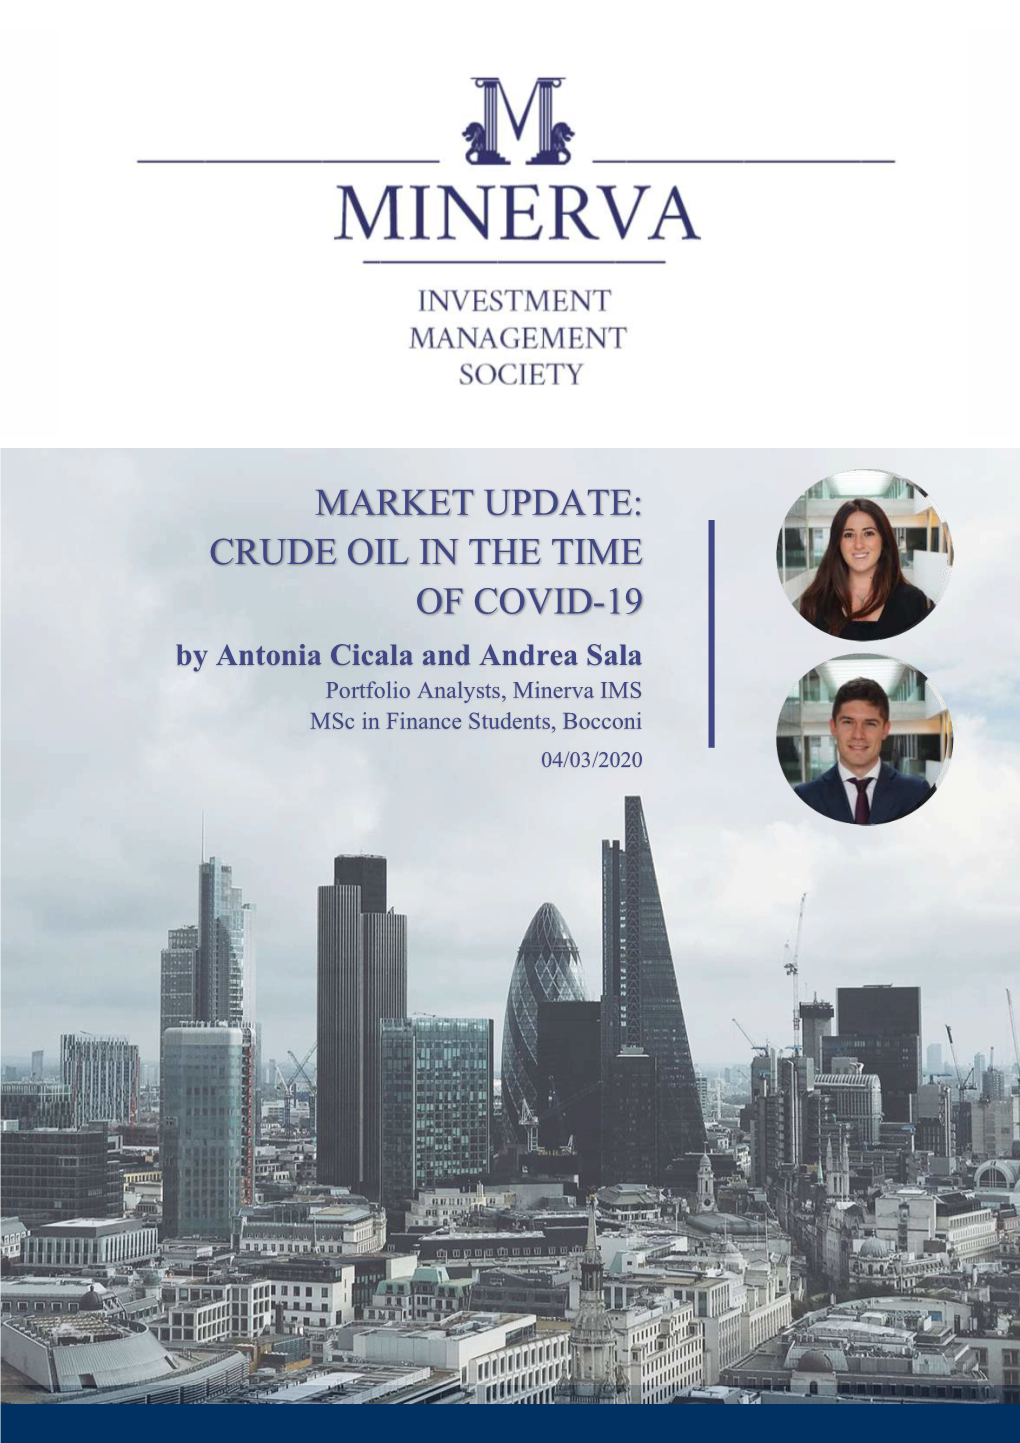 MARKET UPDATE: CRUDE OIL in the TIME of COVID-19 by Antonia Cicala and Andrea Sala Portfolio Analysts, Minerva IMS Msc in Finance Students, Bocconi